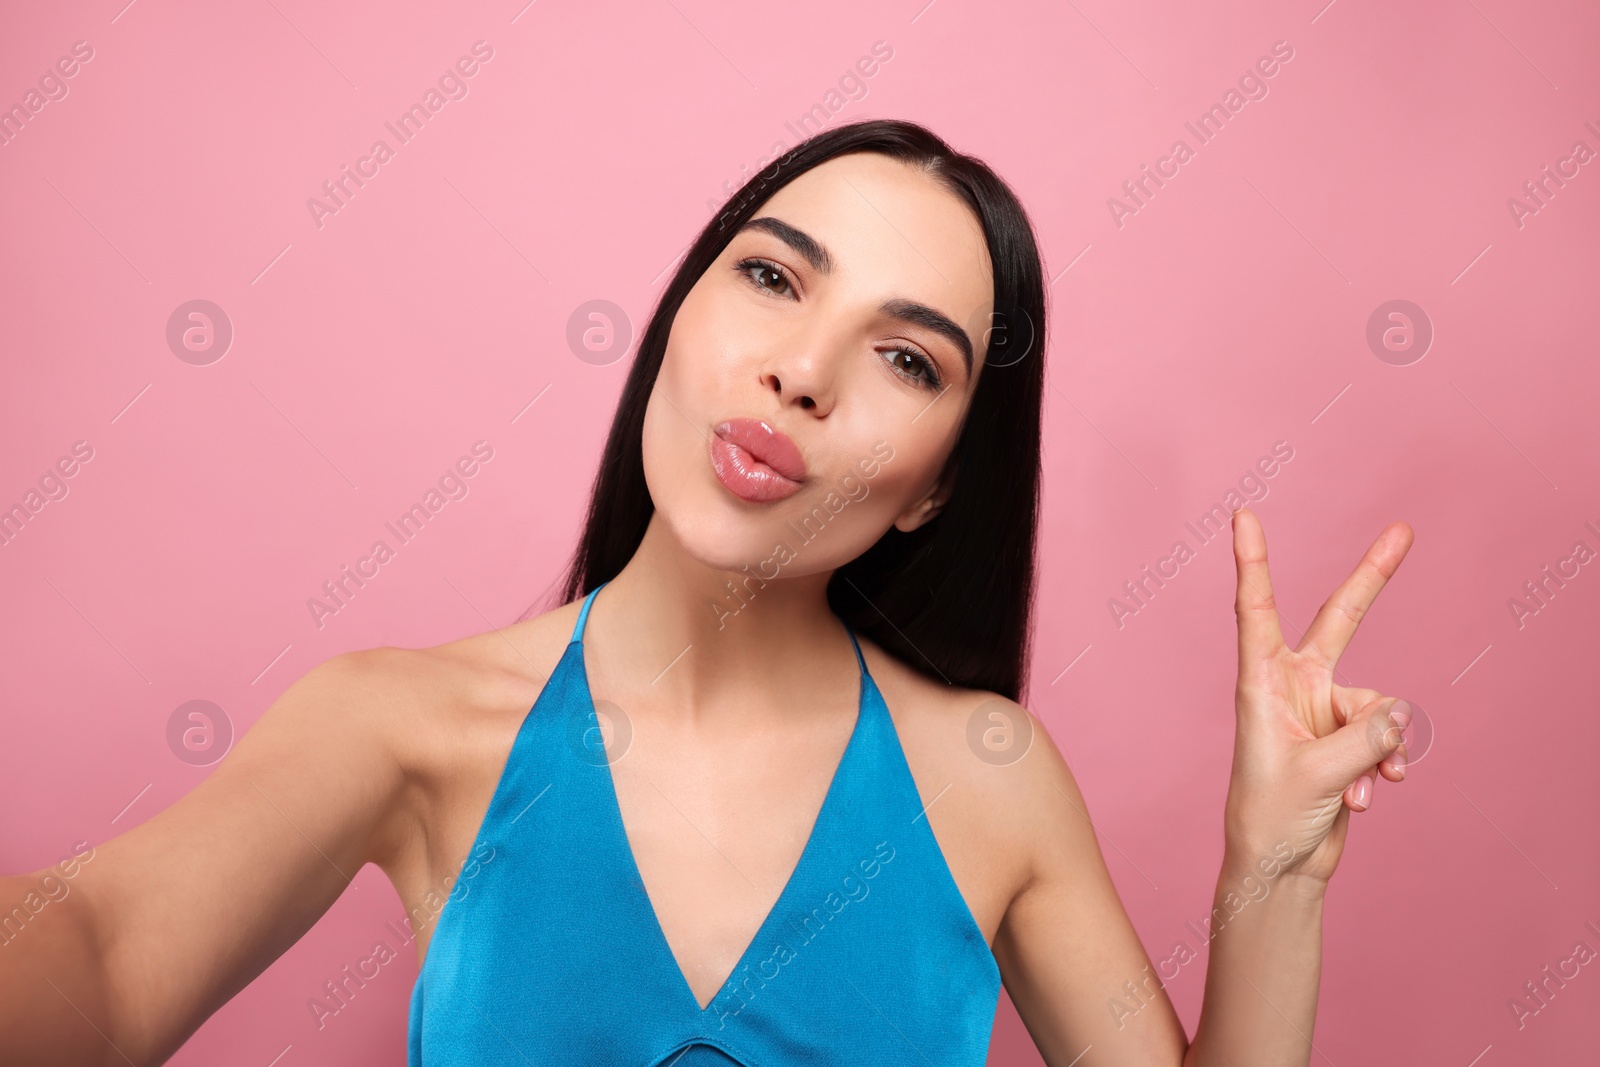 Photo of Beautiful young woman taking selfie while blowing kiss on pink background